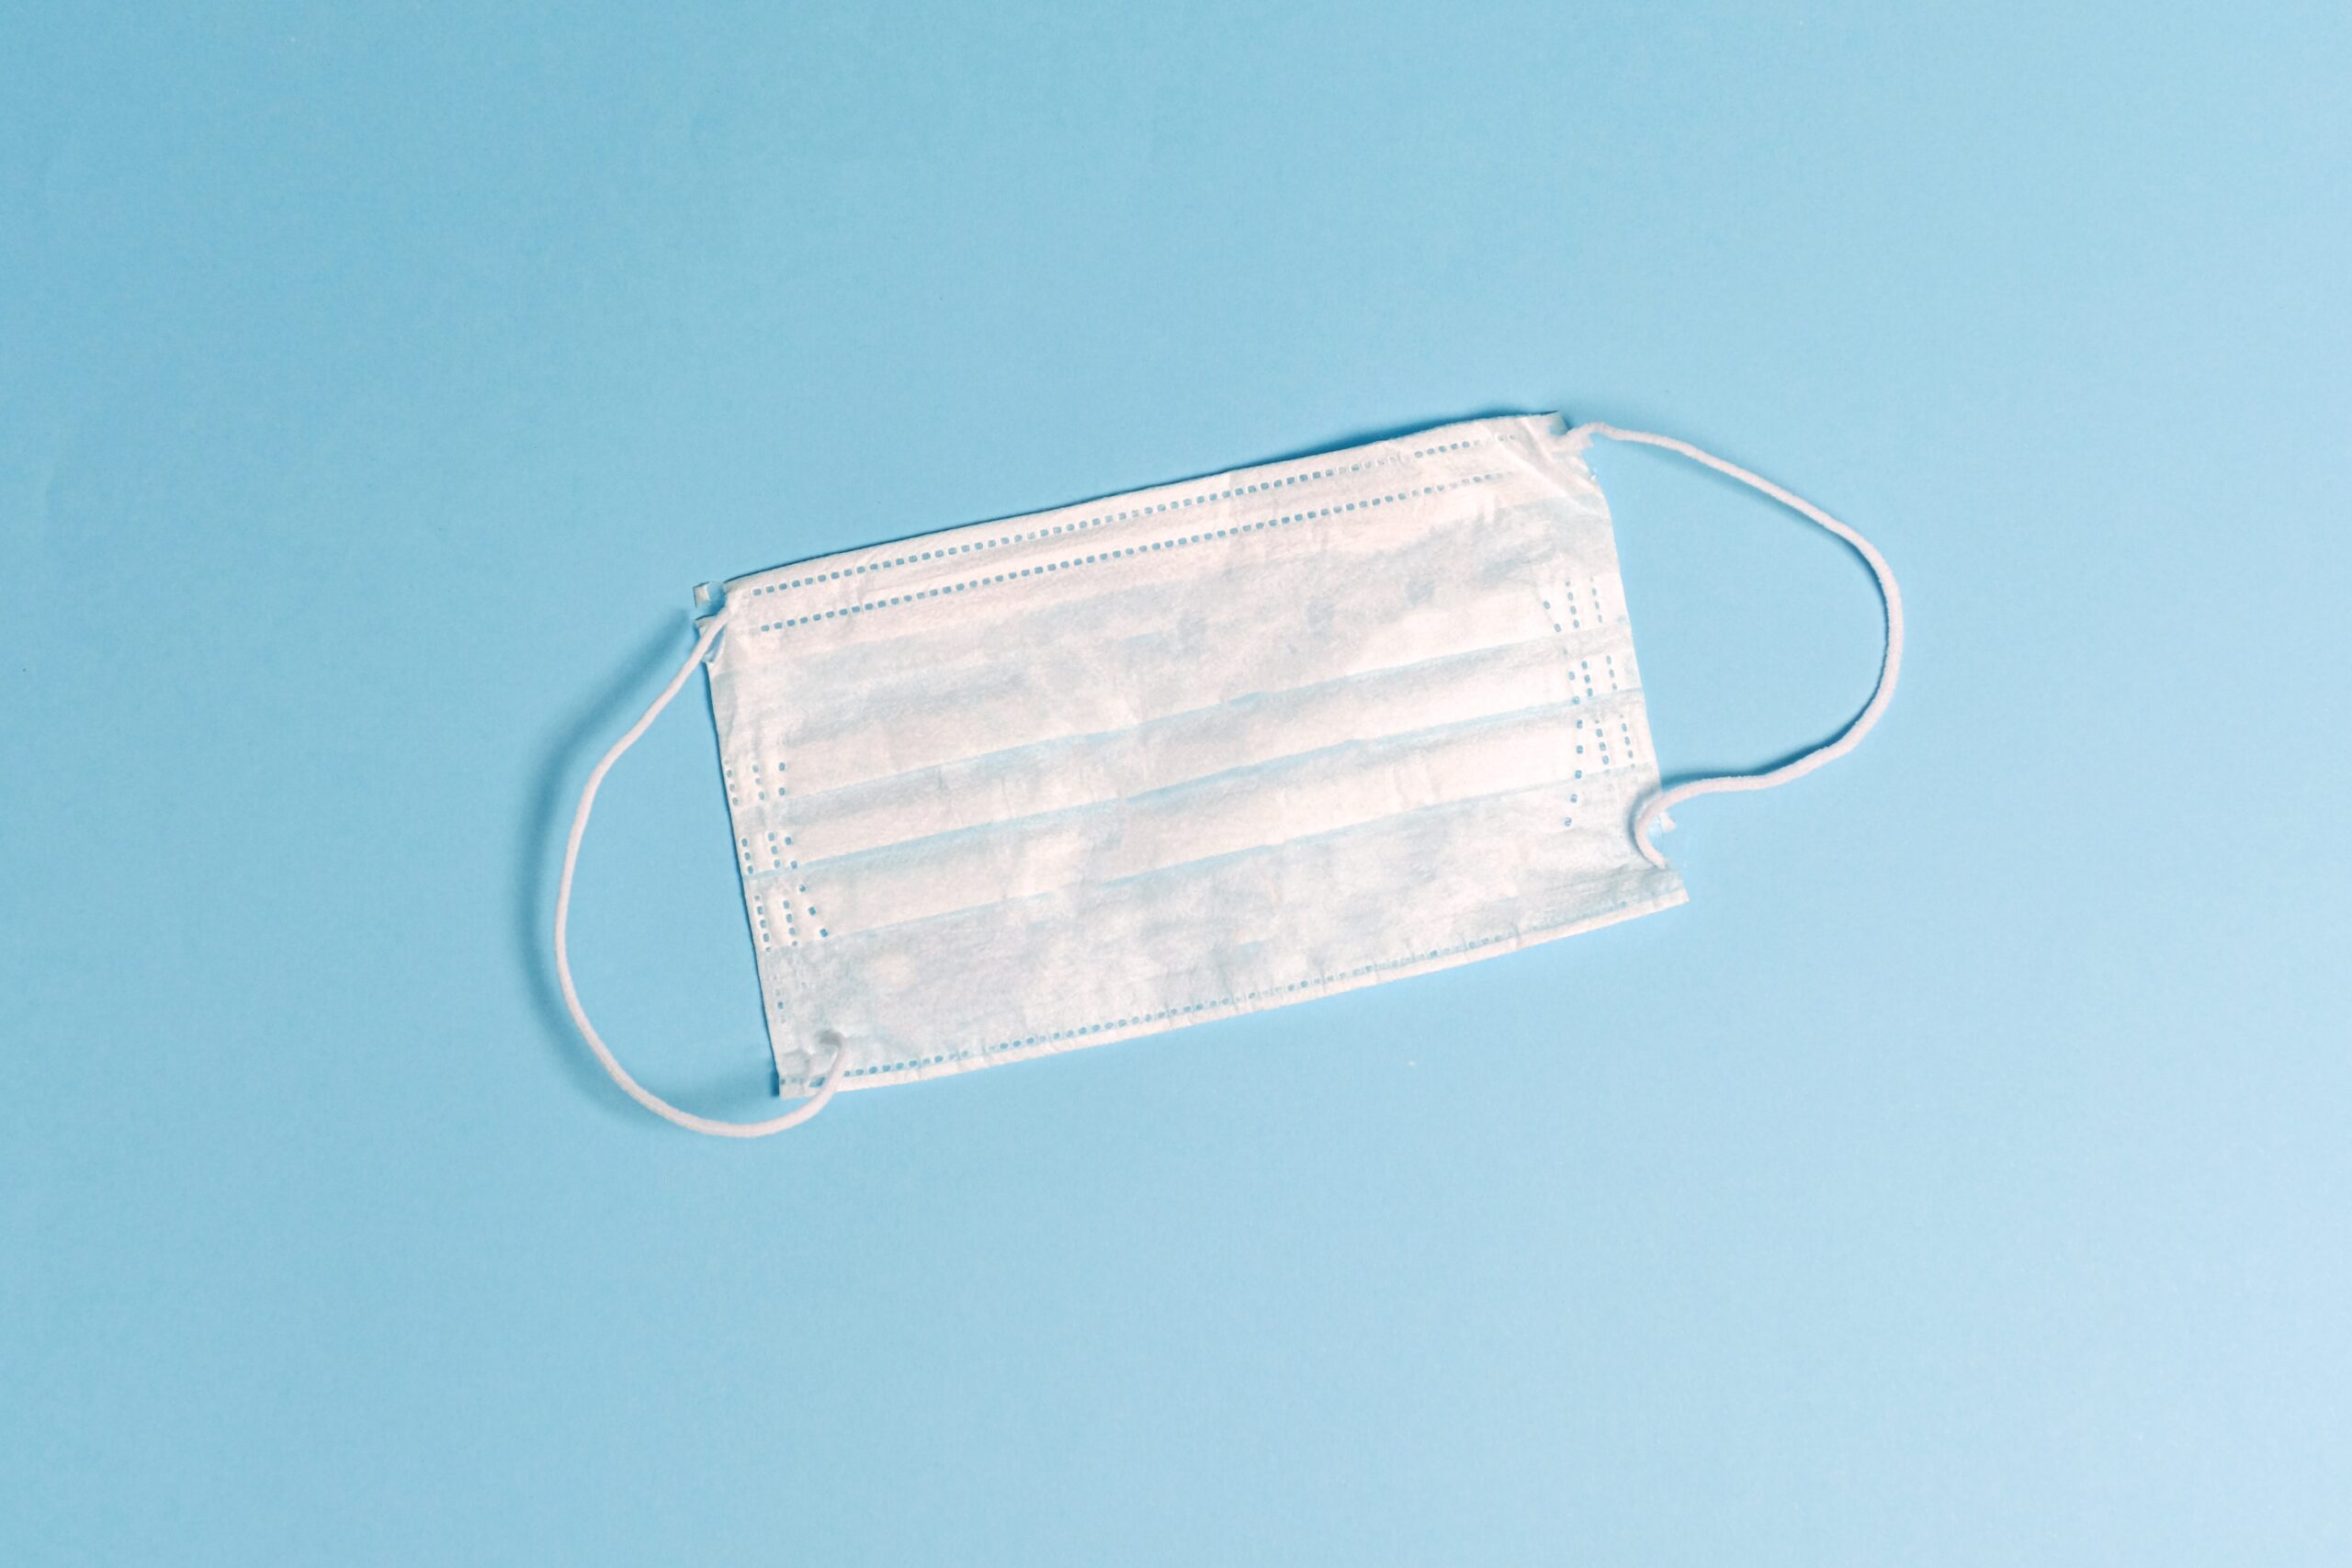 An image of a single surgical facemask lying on a table